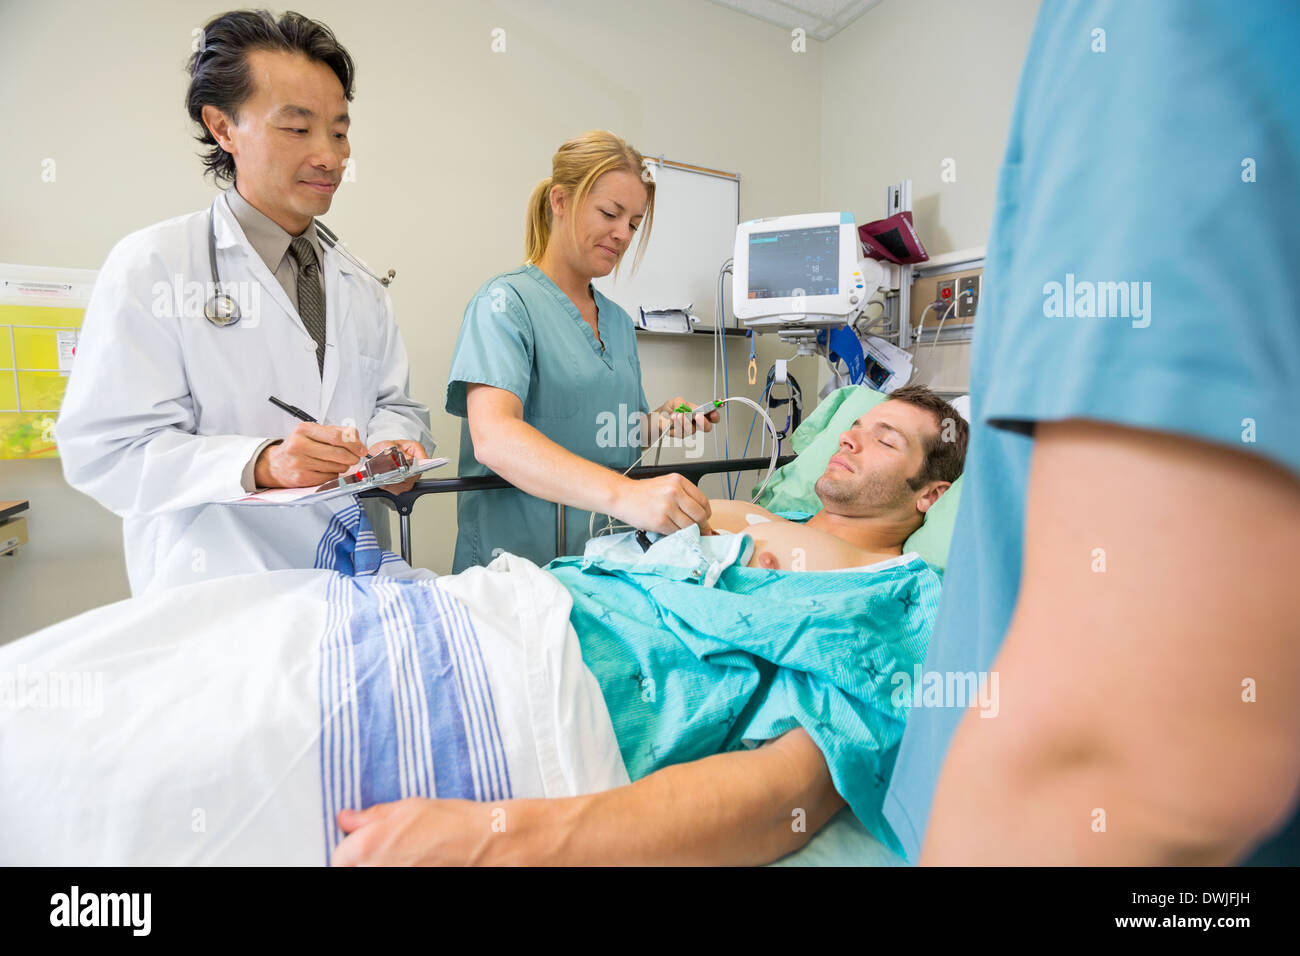 Patient Being Examined By Doctors In Hospital Stock Photo